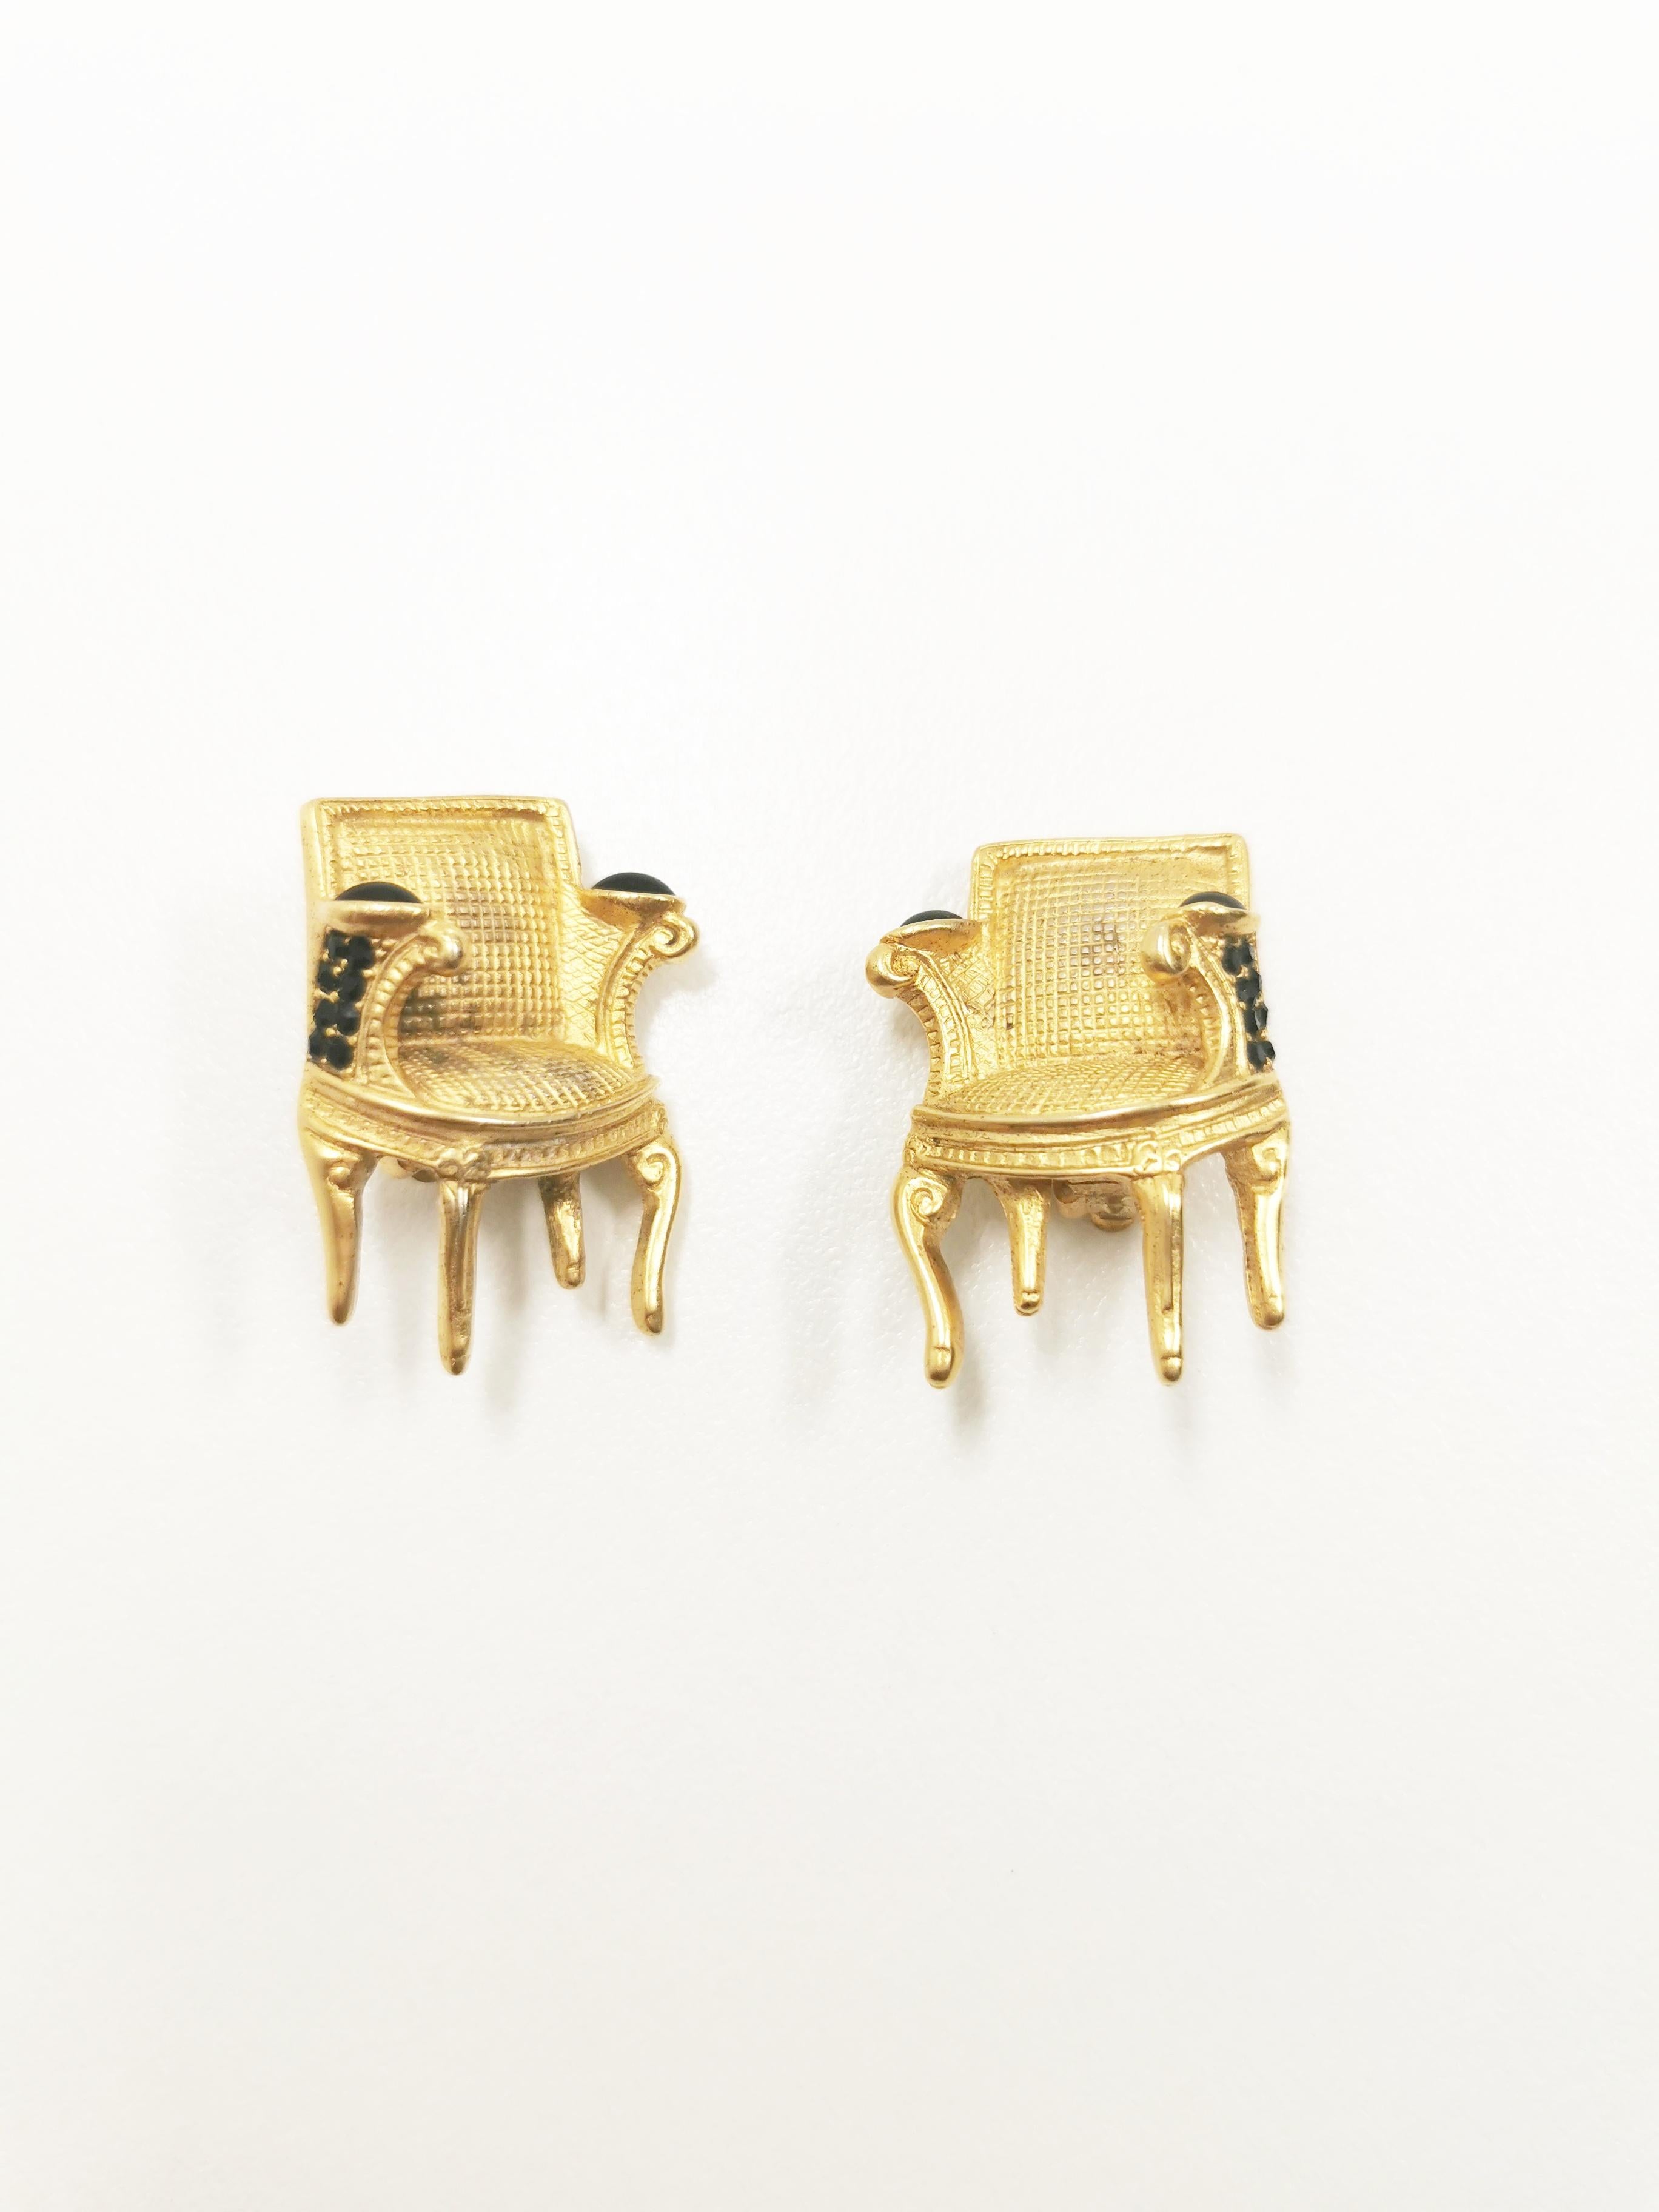 Rococo Gilded Bergère Chairs ROCOCO LOUIS XVI GOLD Chair Earrings by Karl Lagerfeld For Sale